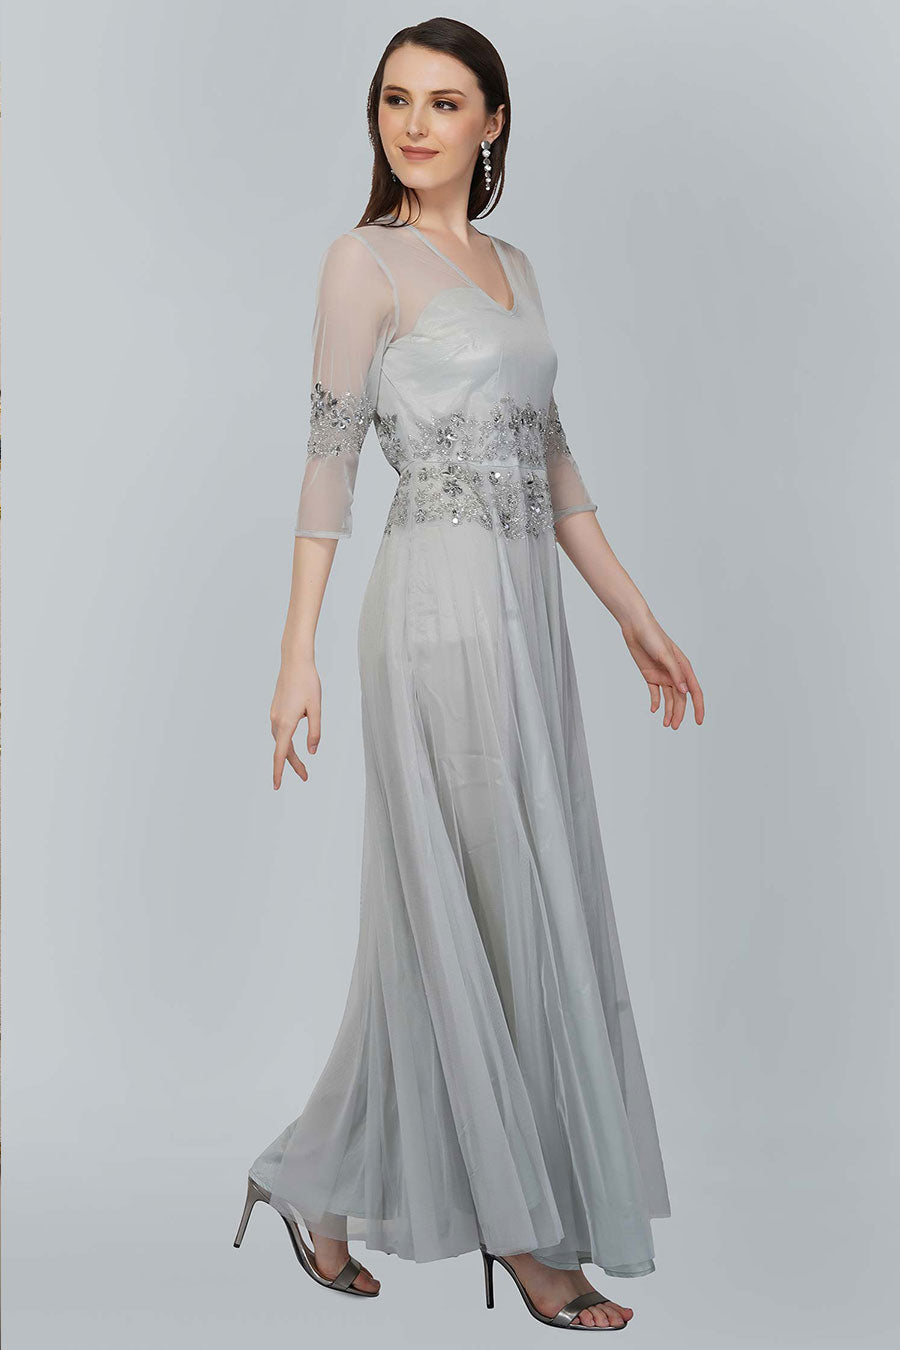 Embellished Silver Grey Gown Dress